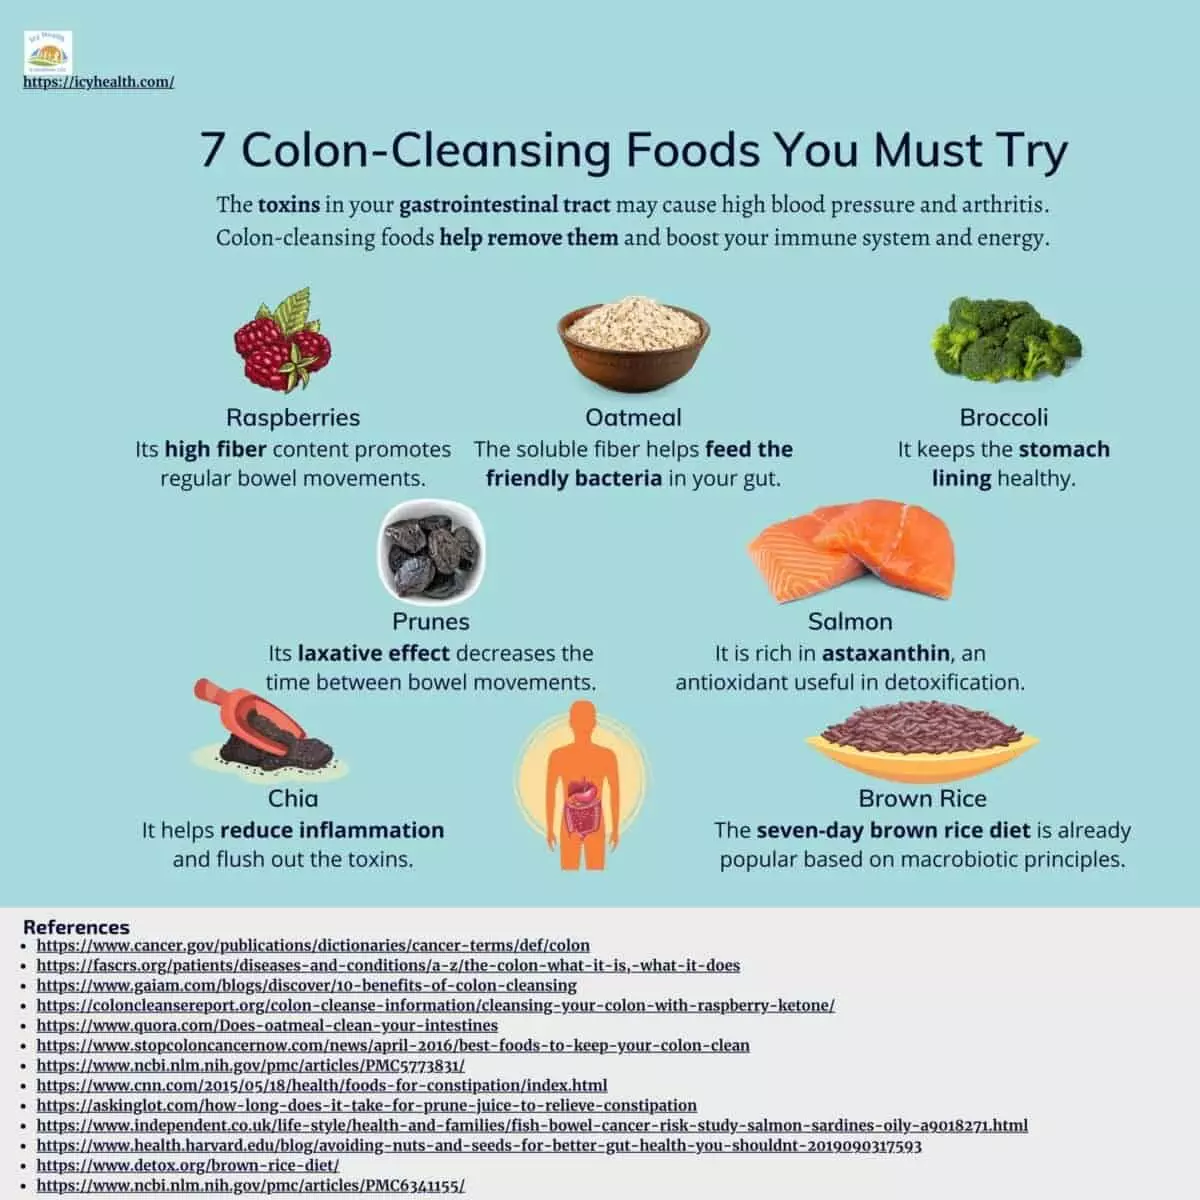 Infographic That Shows 7 Colon-Cleansing Foods You Must Try